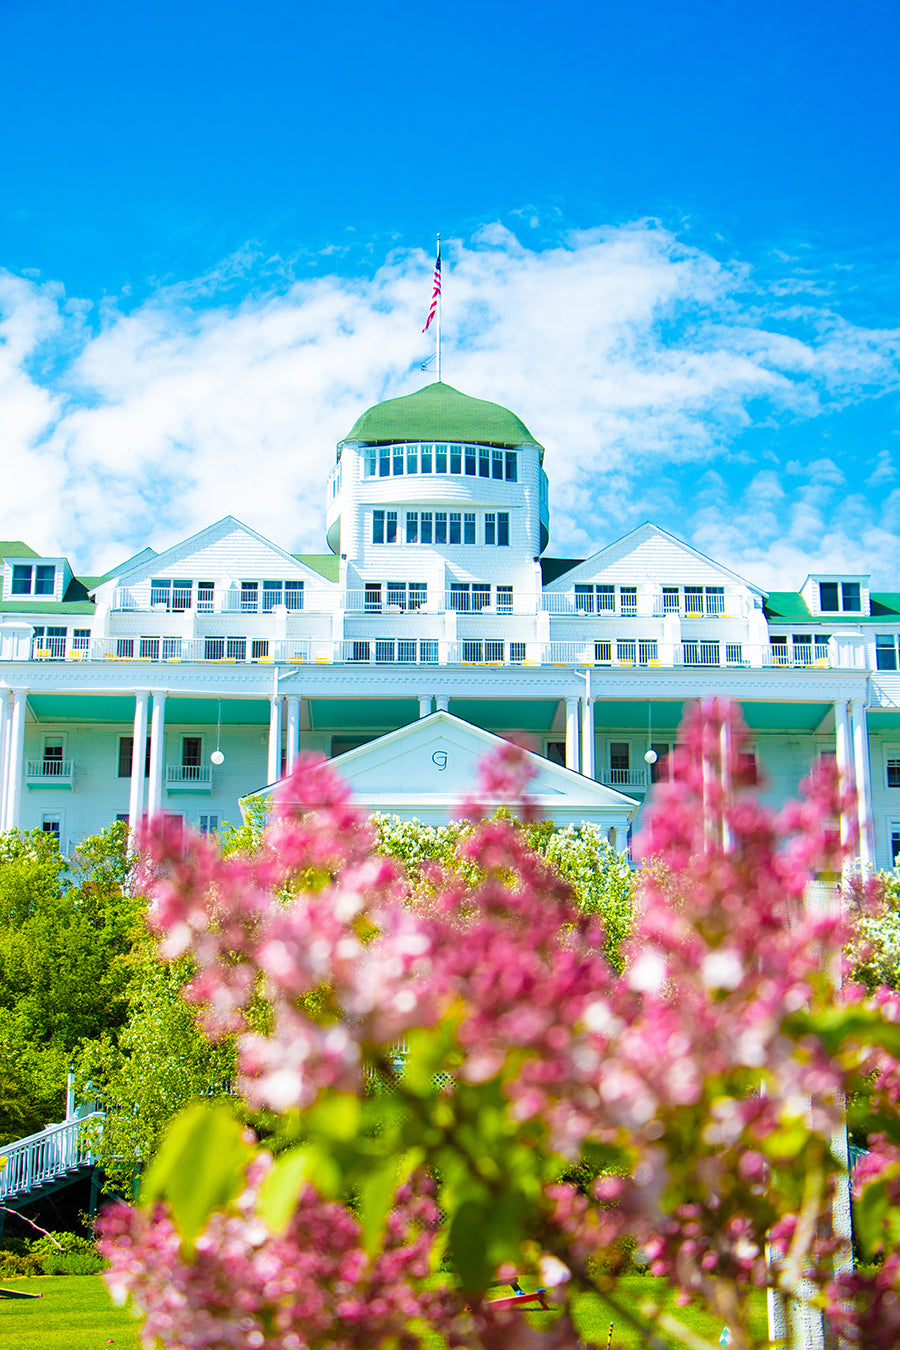 Lilacs & Grand Hotel's Cupola by Jennifer Wohletz.  Photography on canvas mounted on black styrene. 10" x 15"  Description:  Lilacs bloom in the Tea Garden beneath the Grand Hotel.  An American flag waves above the hotels cupola. 